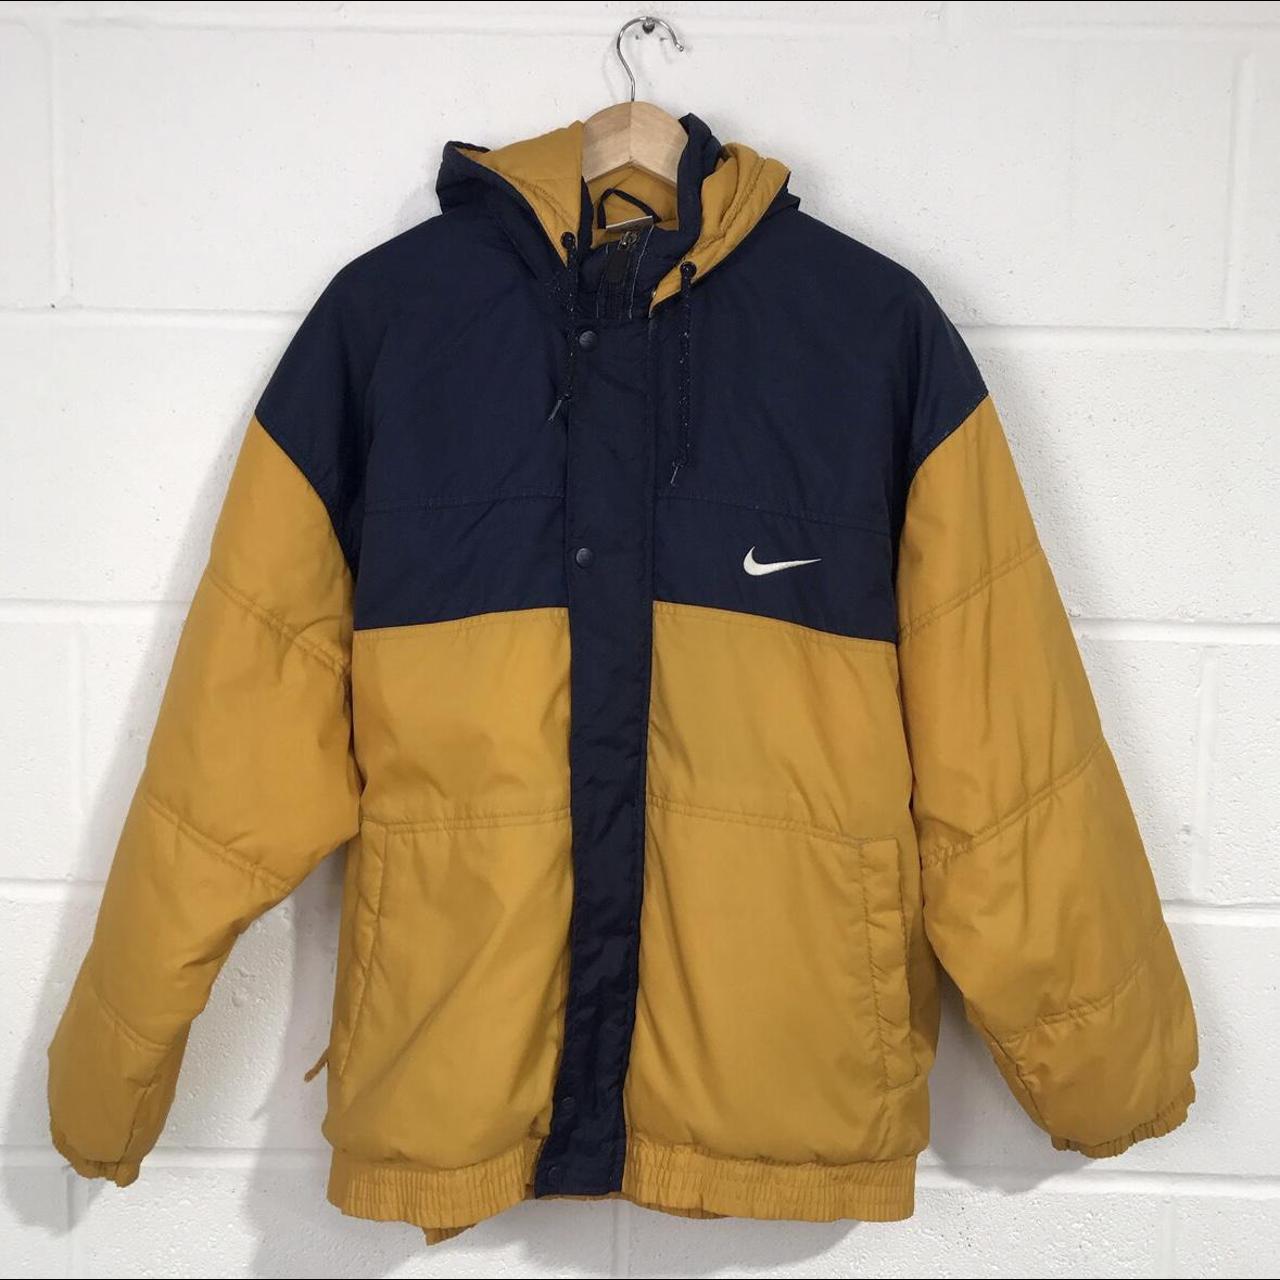 Vintage Nike navy and yellow zip up jacket coat with... - Depop